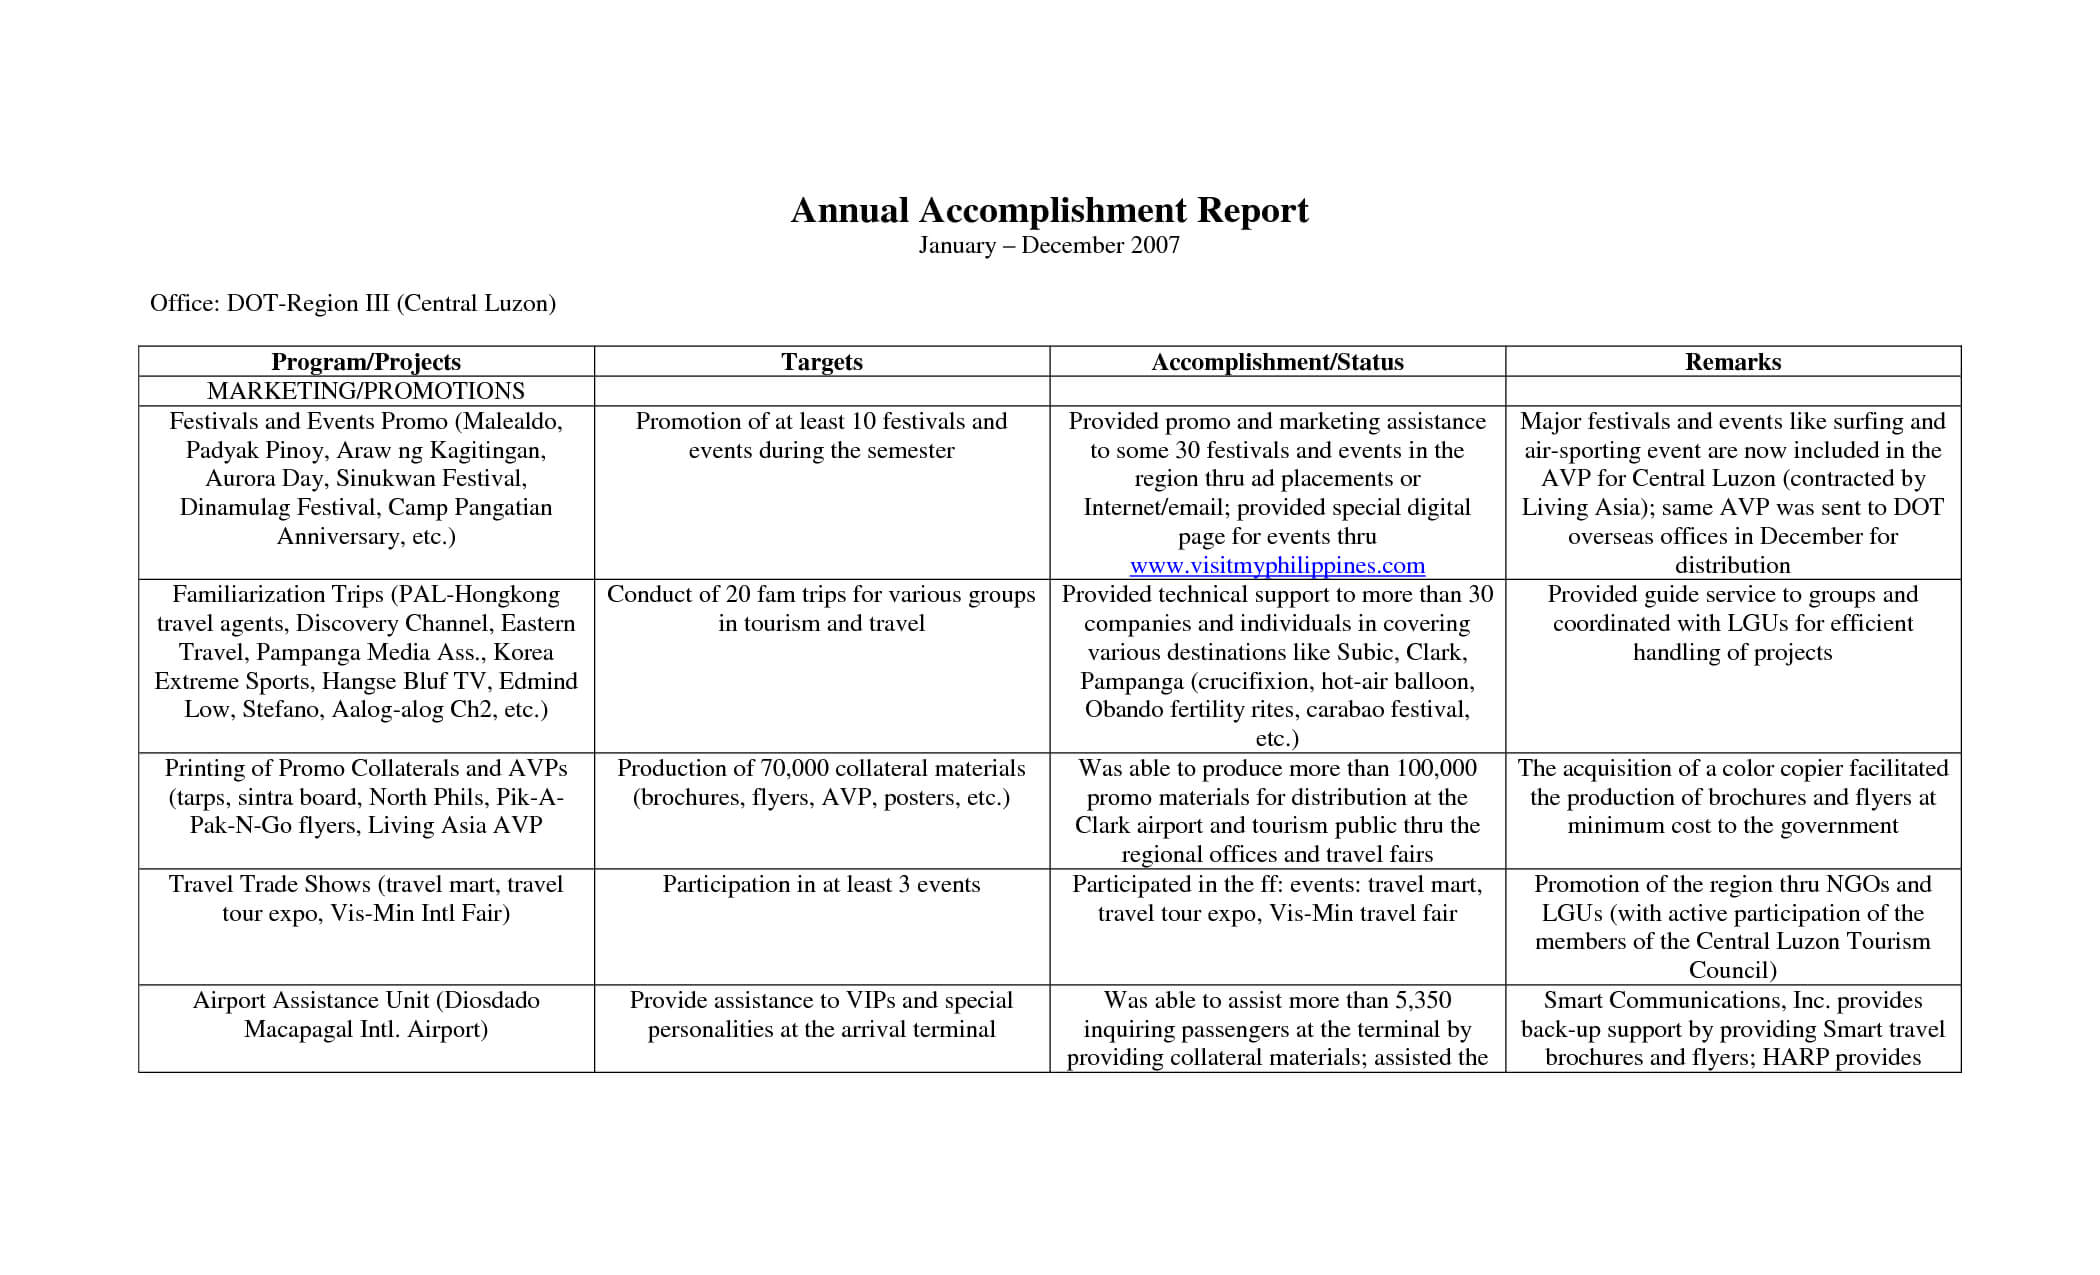 Terrific Annual Accomplishment Report Sample : V M D With Weekly Accomplishment Report Template